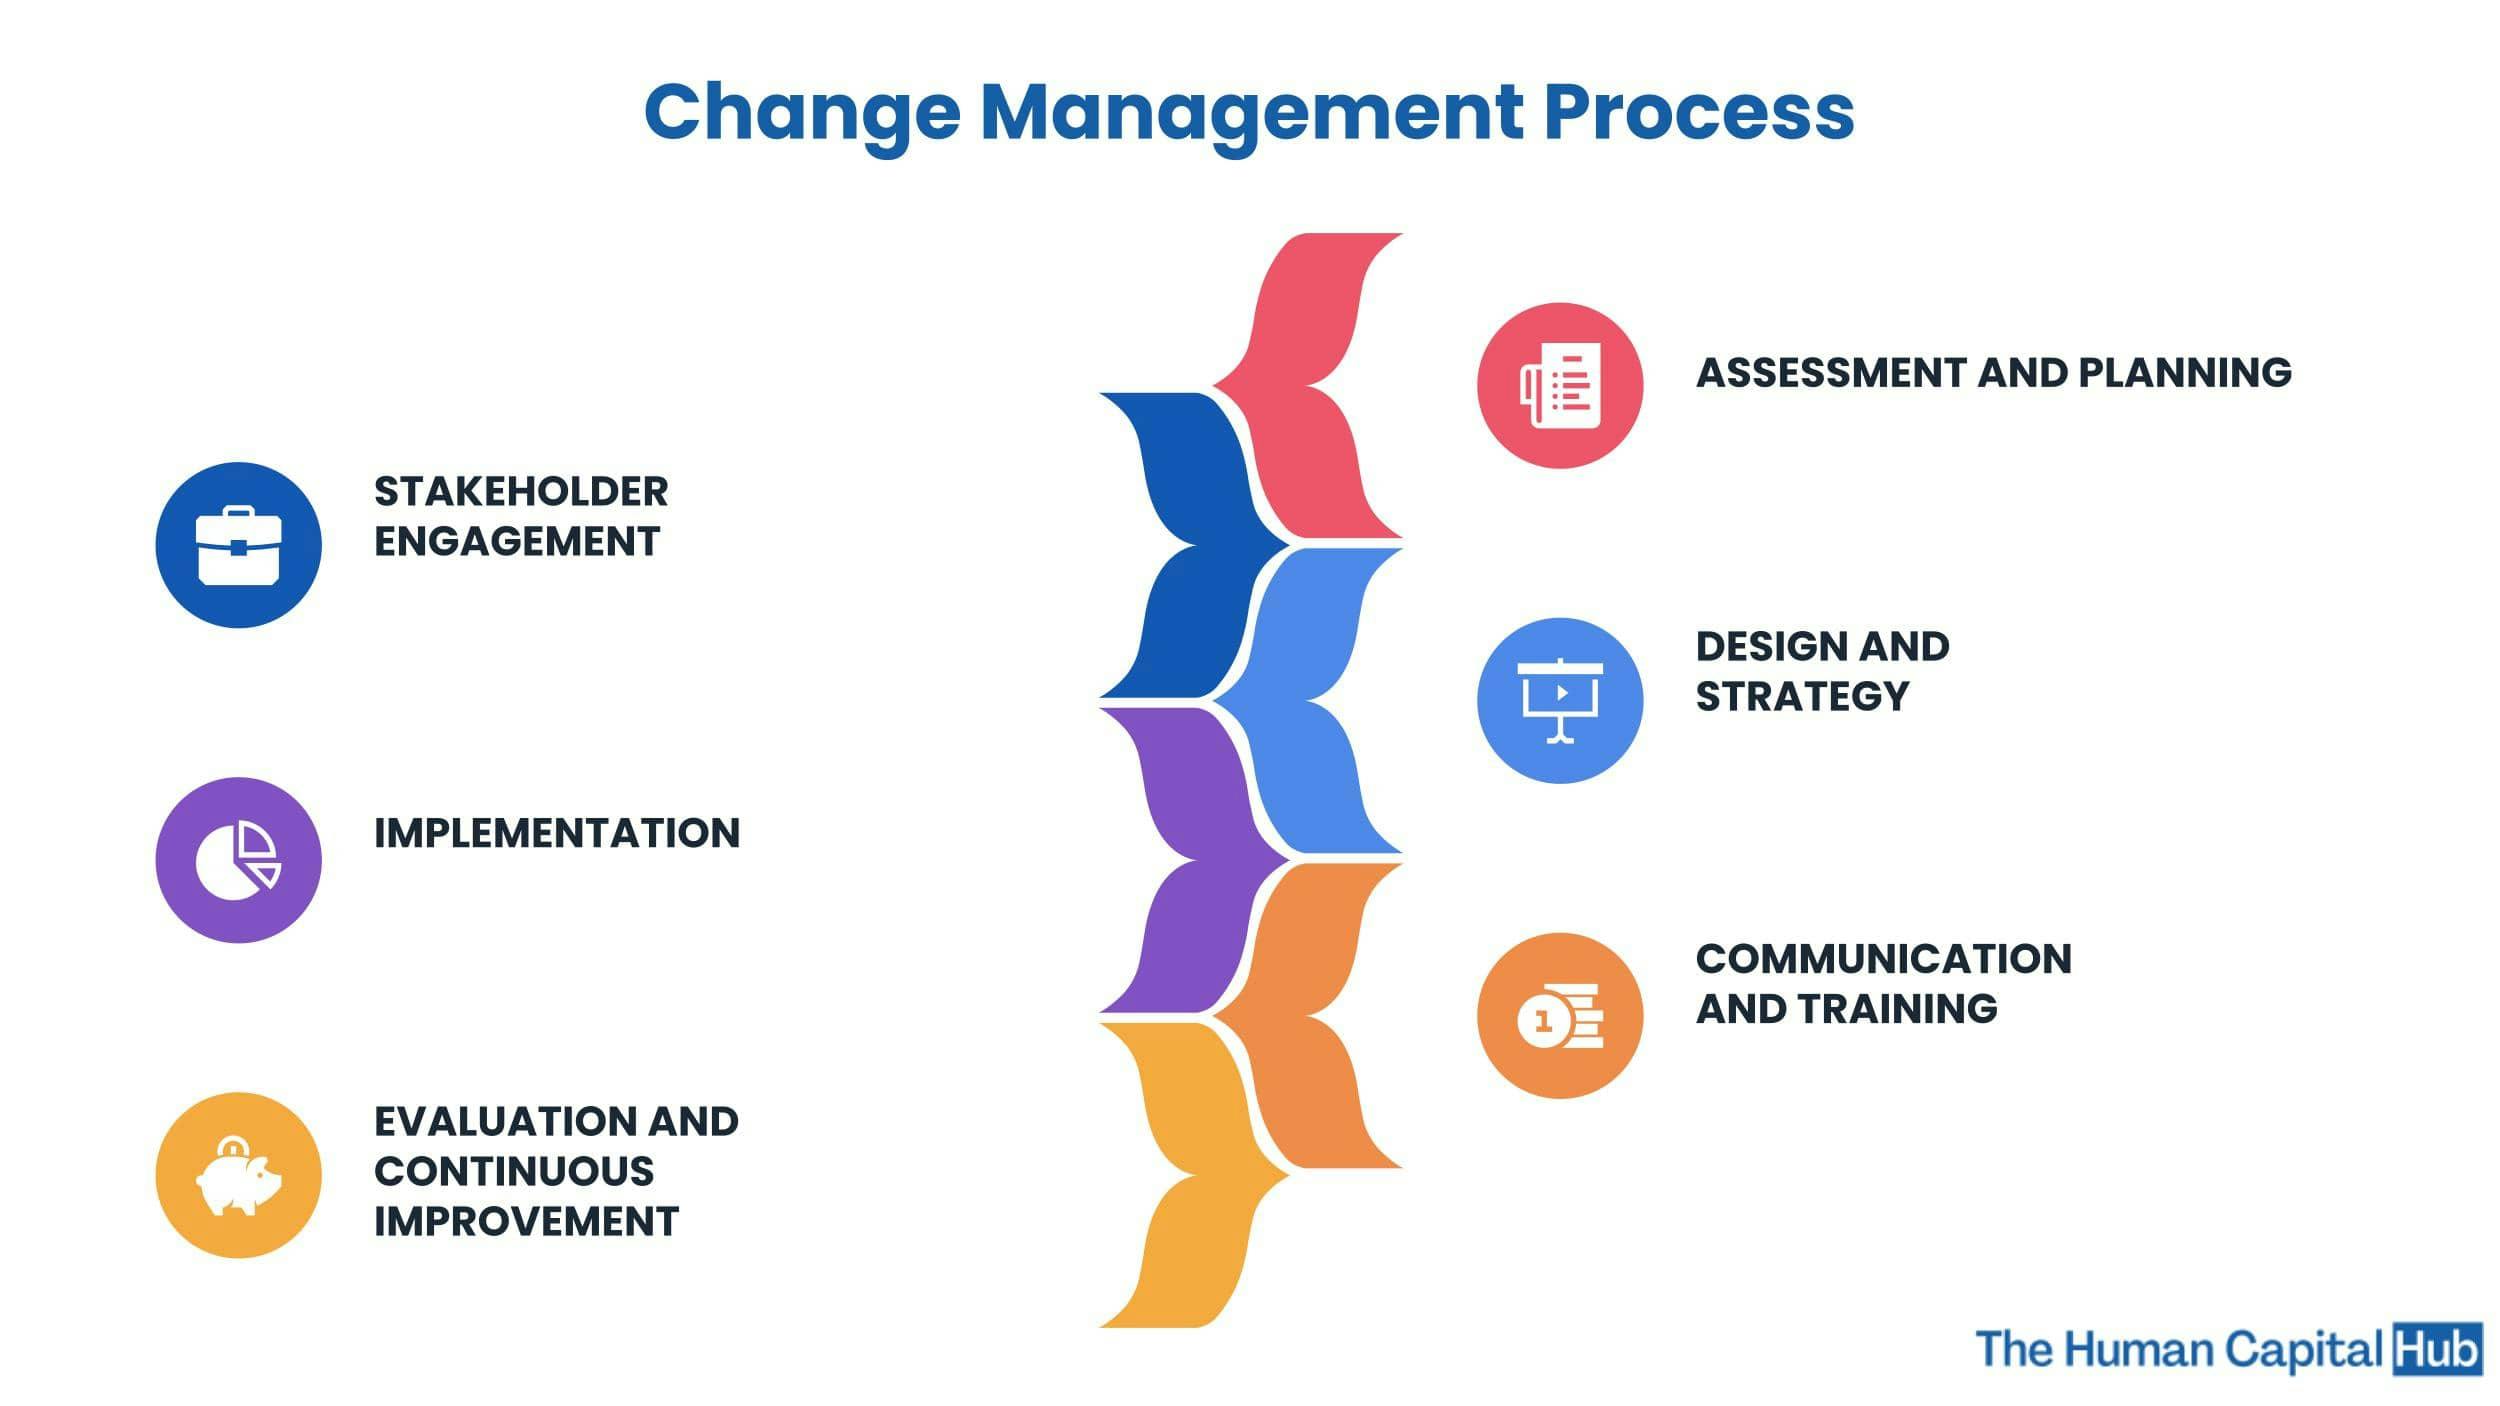 Change management process: How to make it work